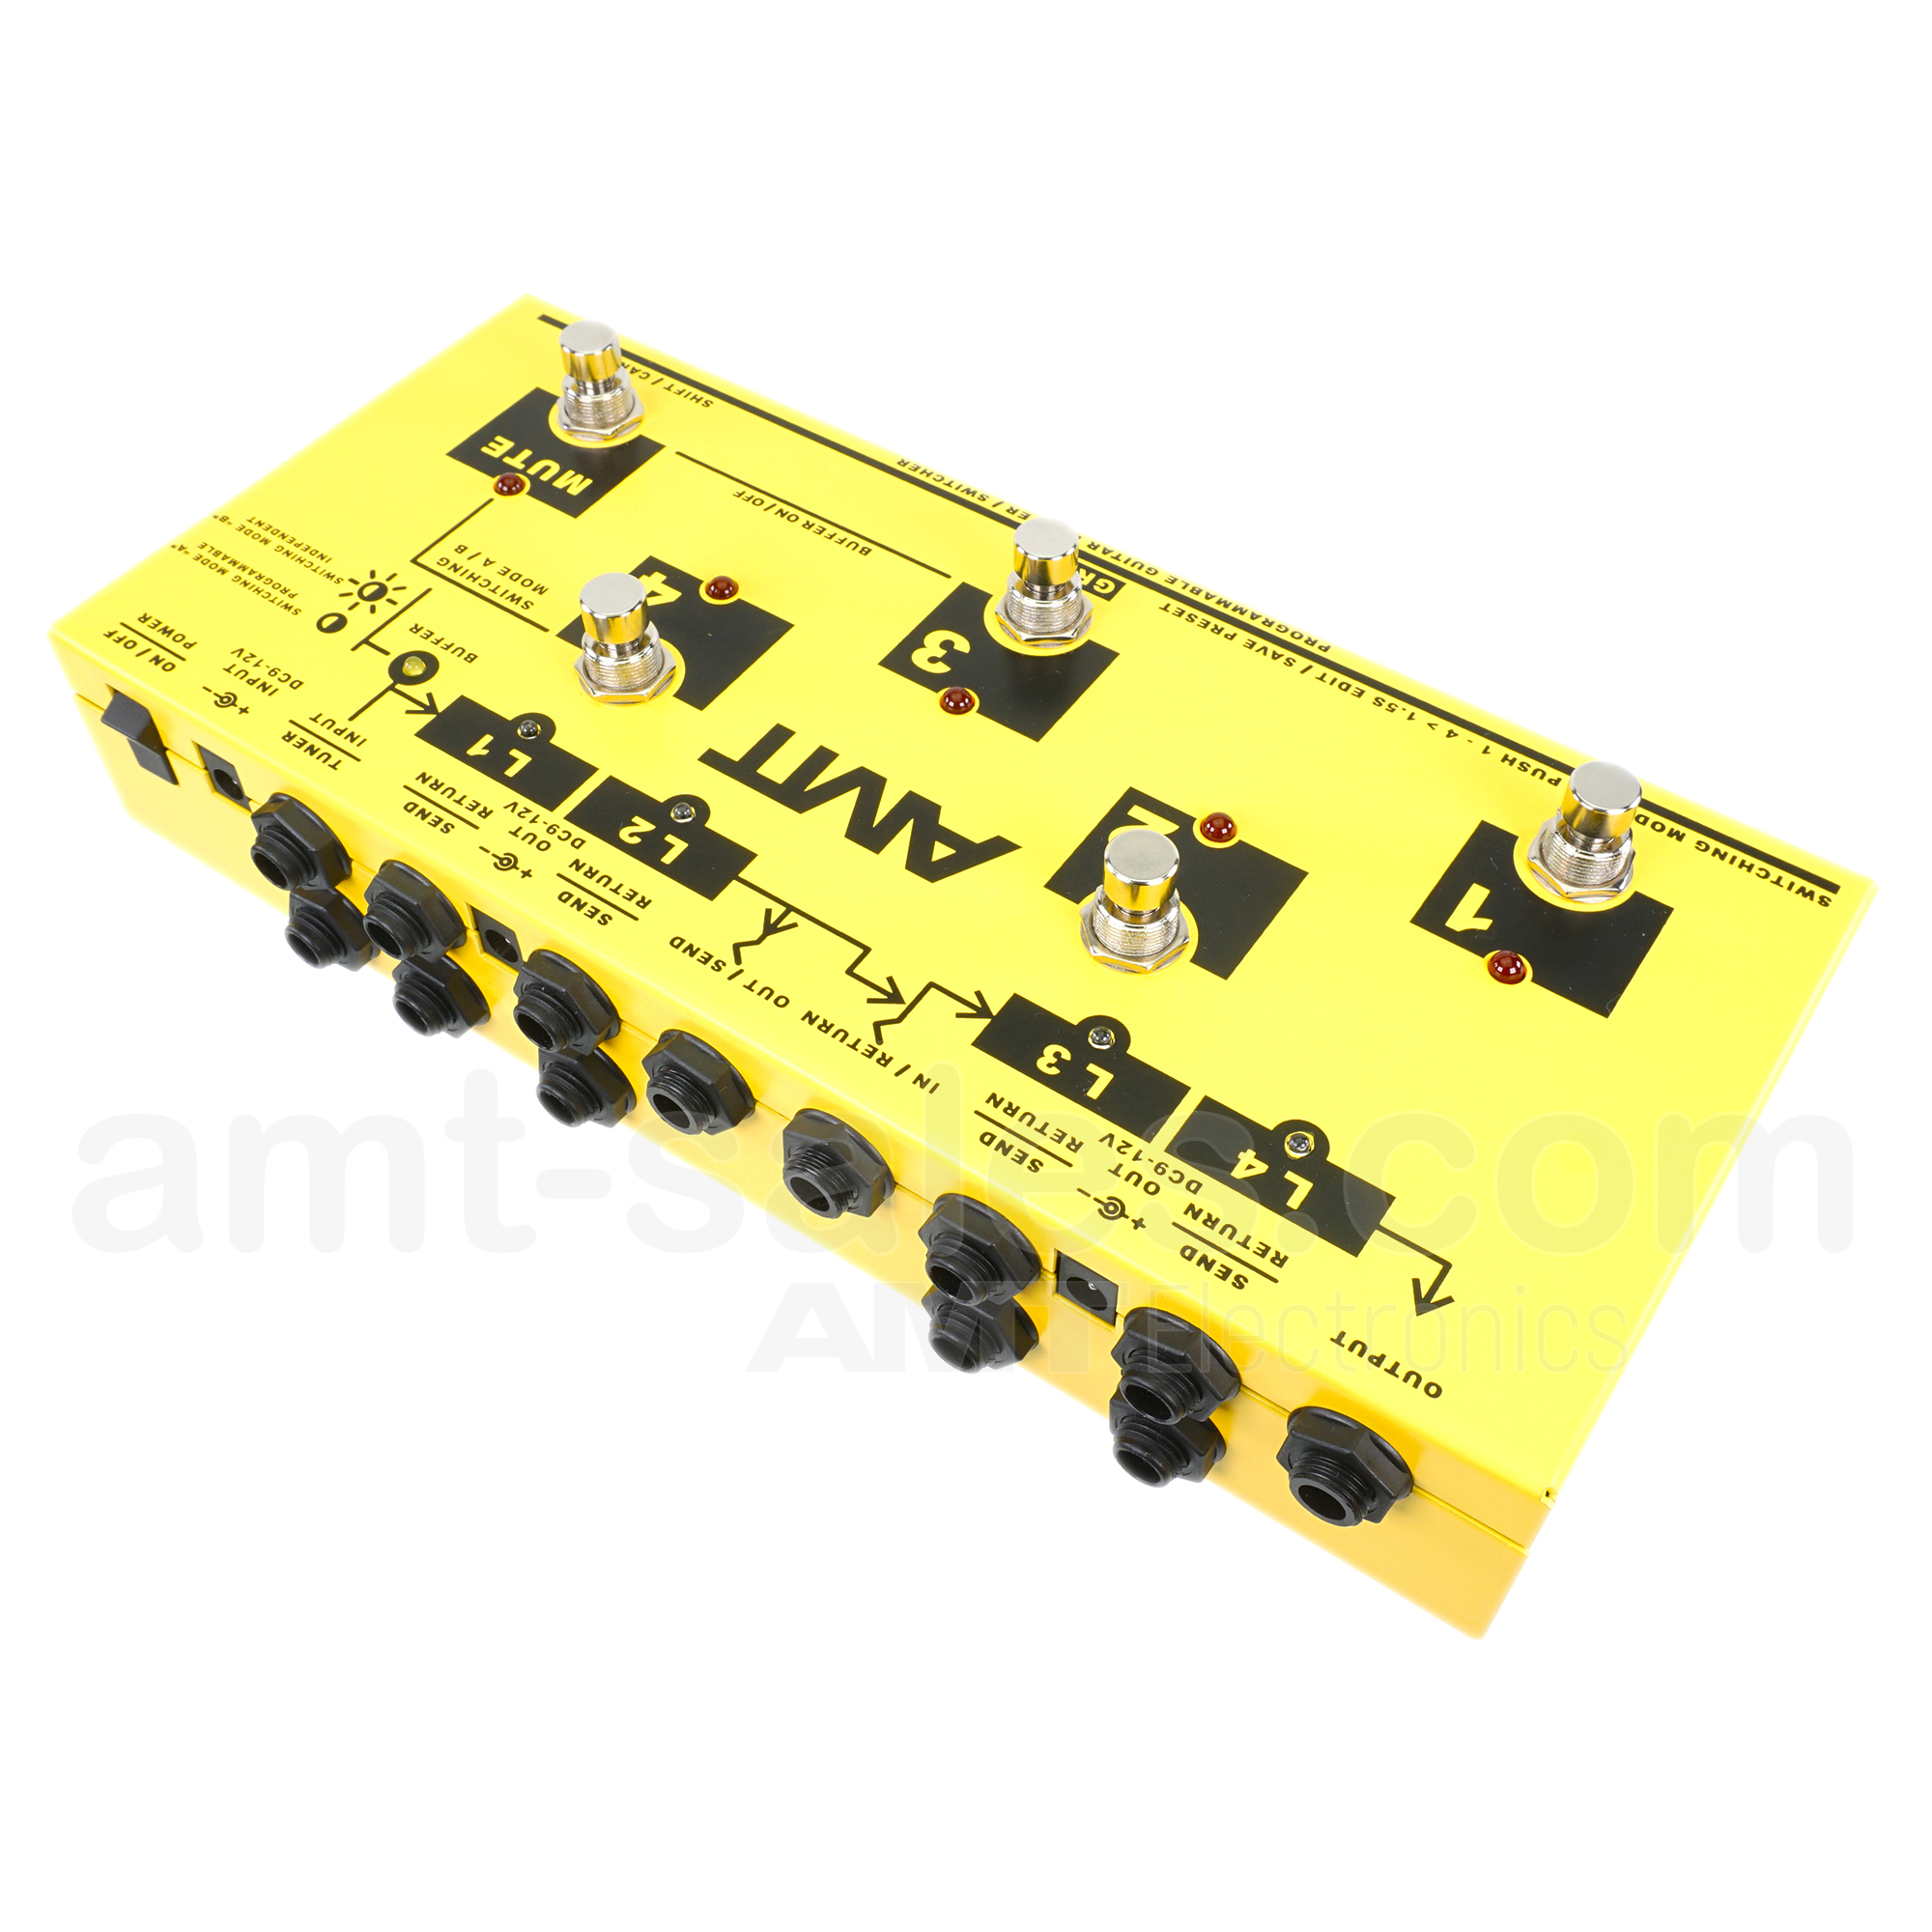 AMT GR-4 - programmable guitar switching system with 4 loops (+ power  supply 12V with EU plug included!)